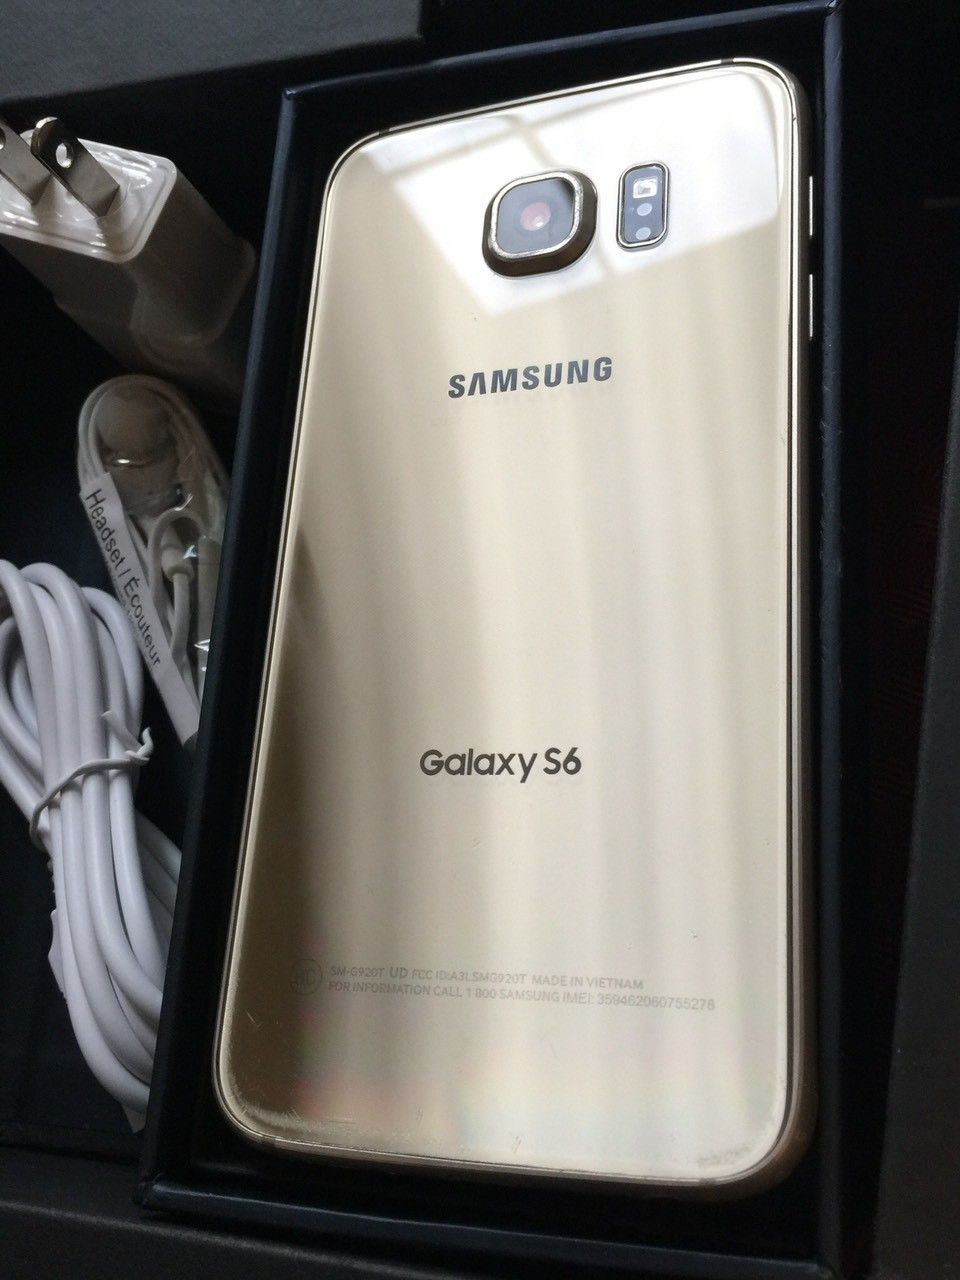 Samsung Galaxy S6 - excellent condition, factory unlocked, clean IMEI